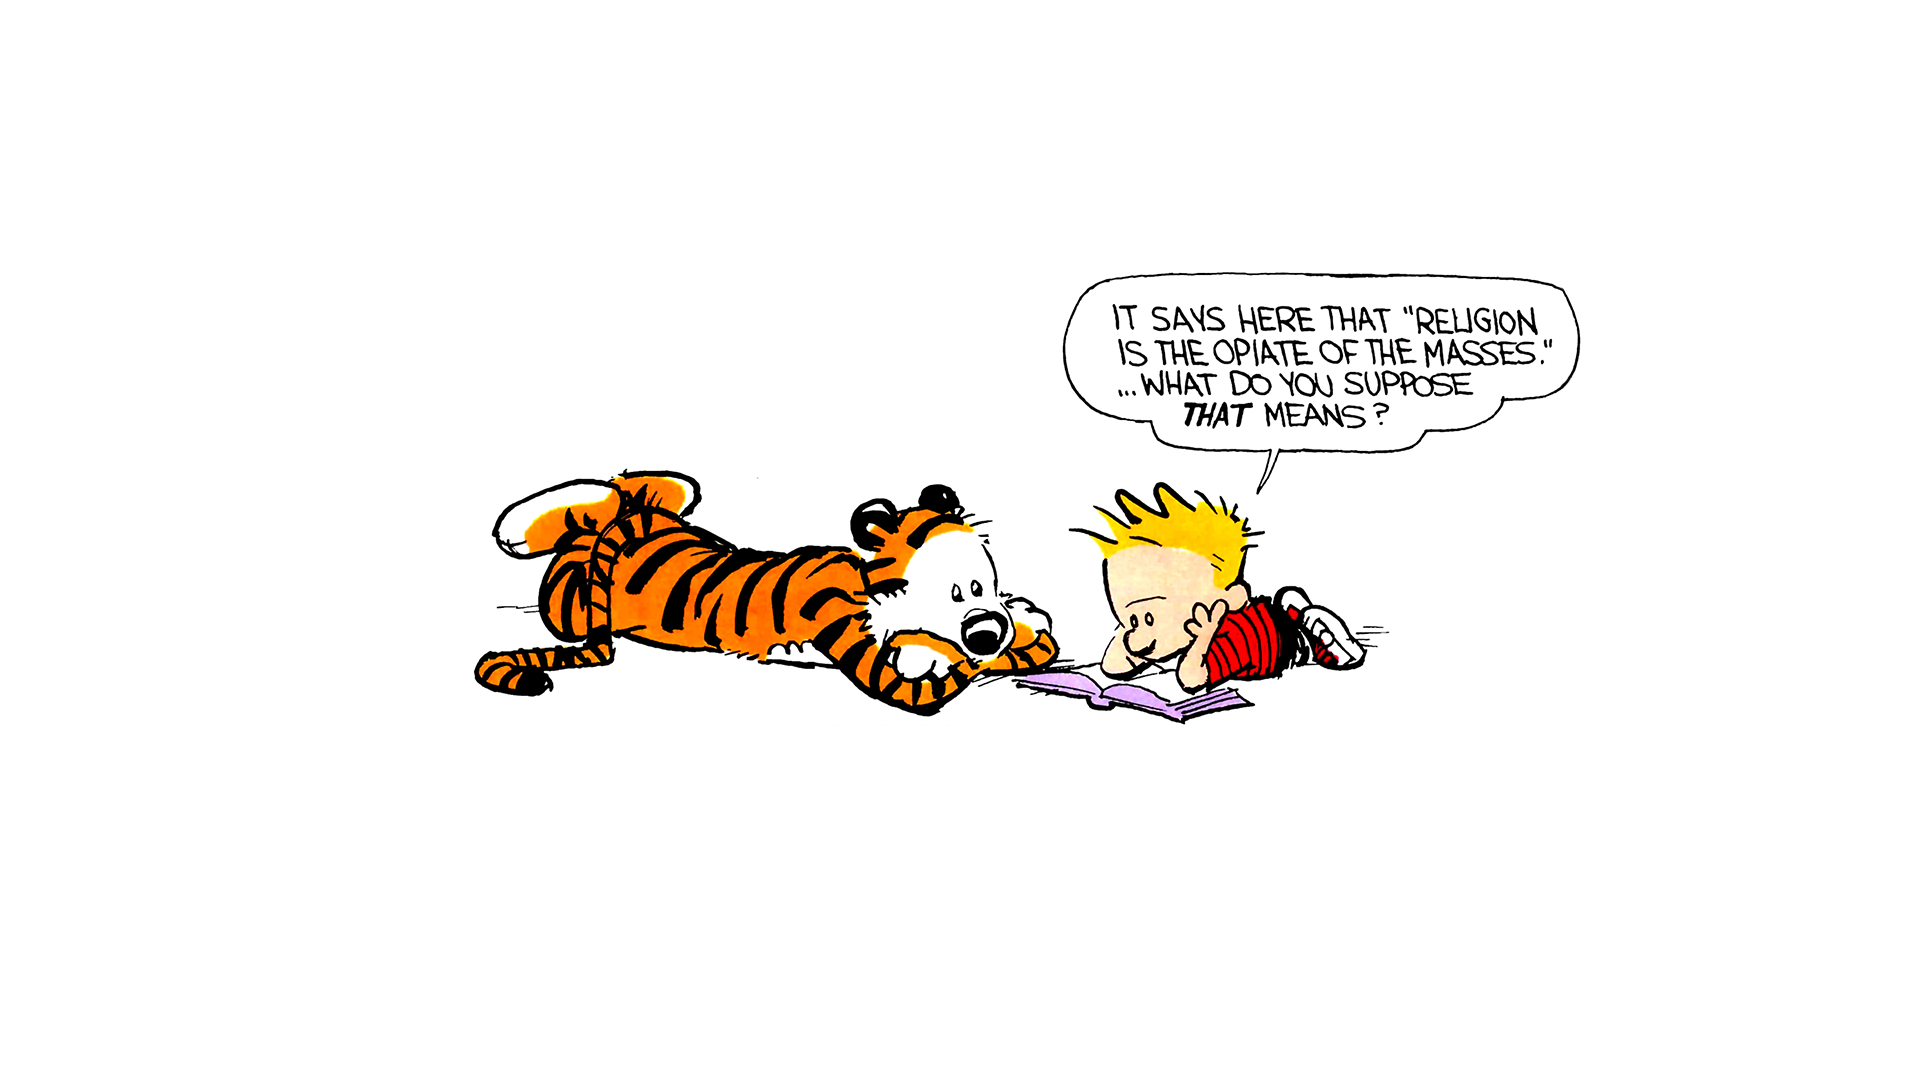 Calvin & Hobbes Backgrounds, Compatible - PC, Mobile, Gadgets| 1920x1080 px